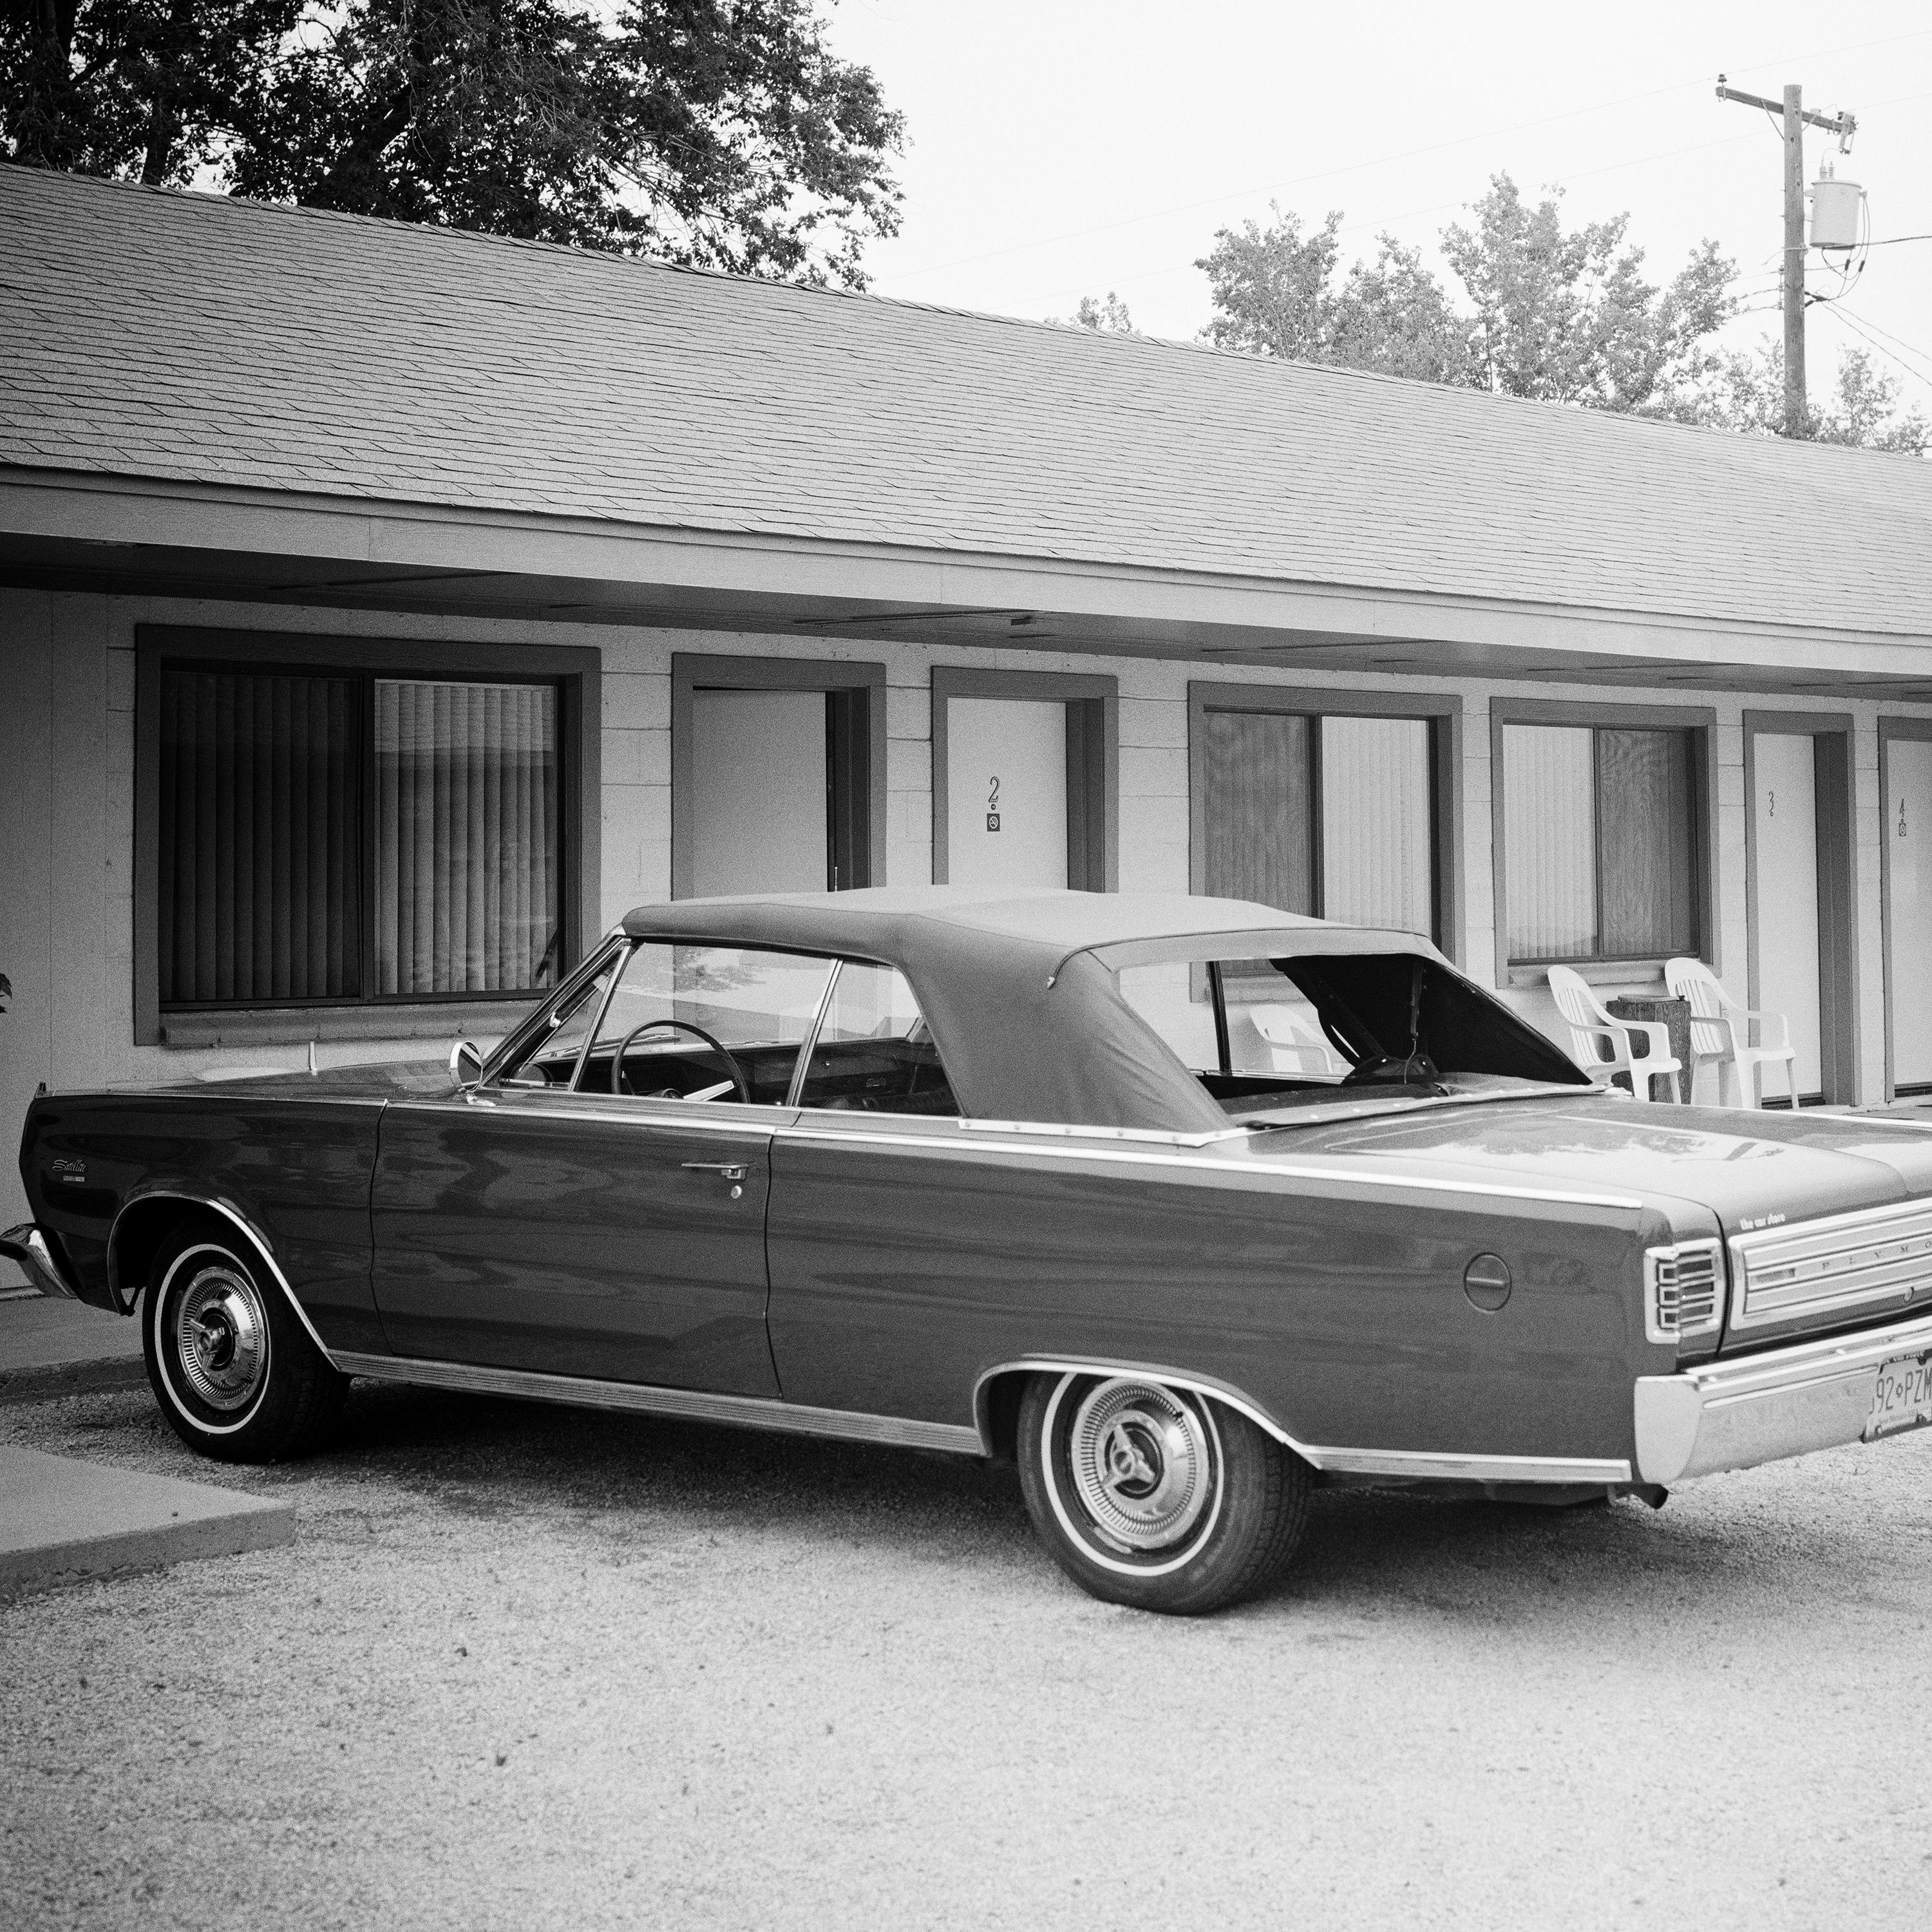 1967 Plymouth, Oldtimer, Route 66, USA, black white art landscape photography For Sale 3